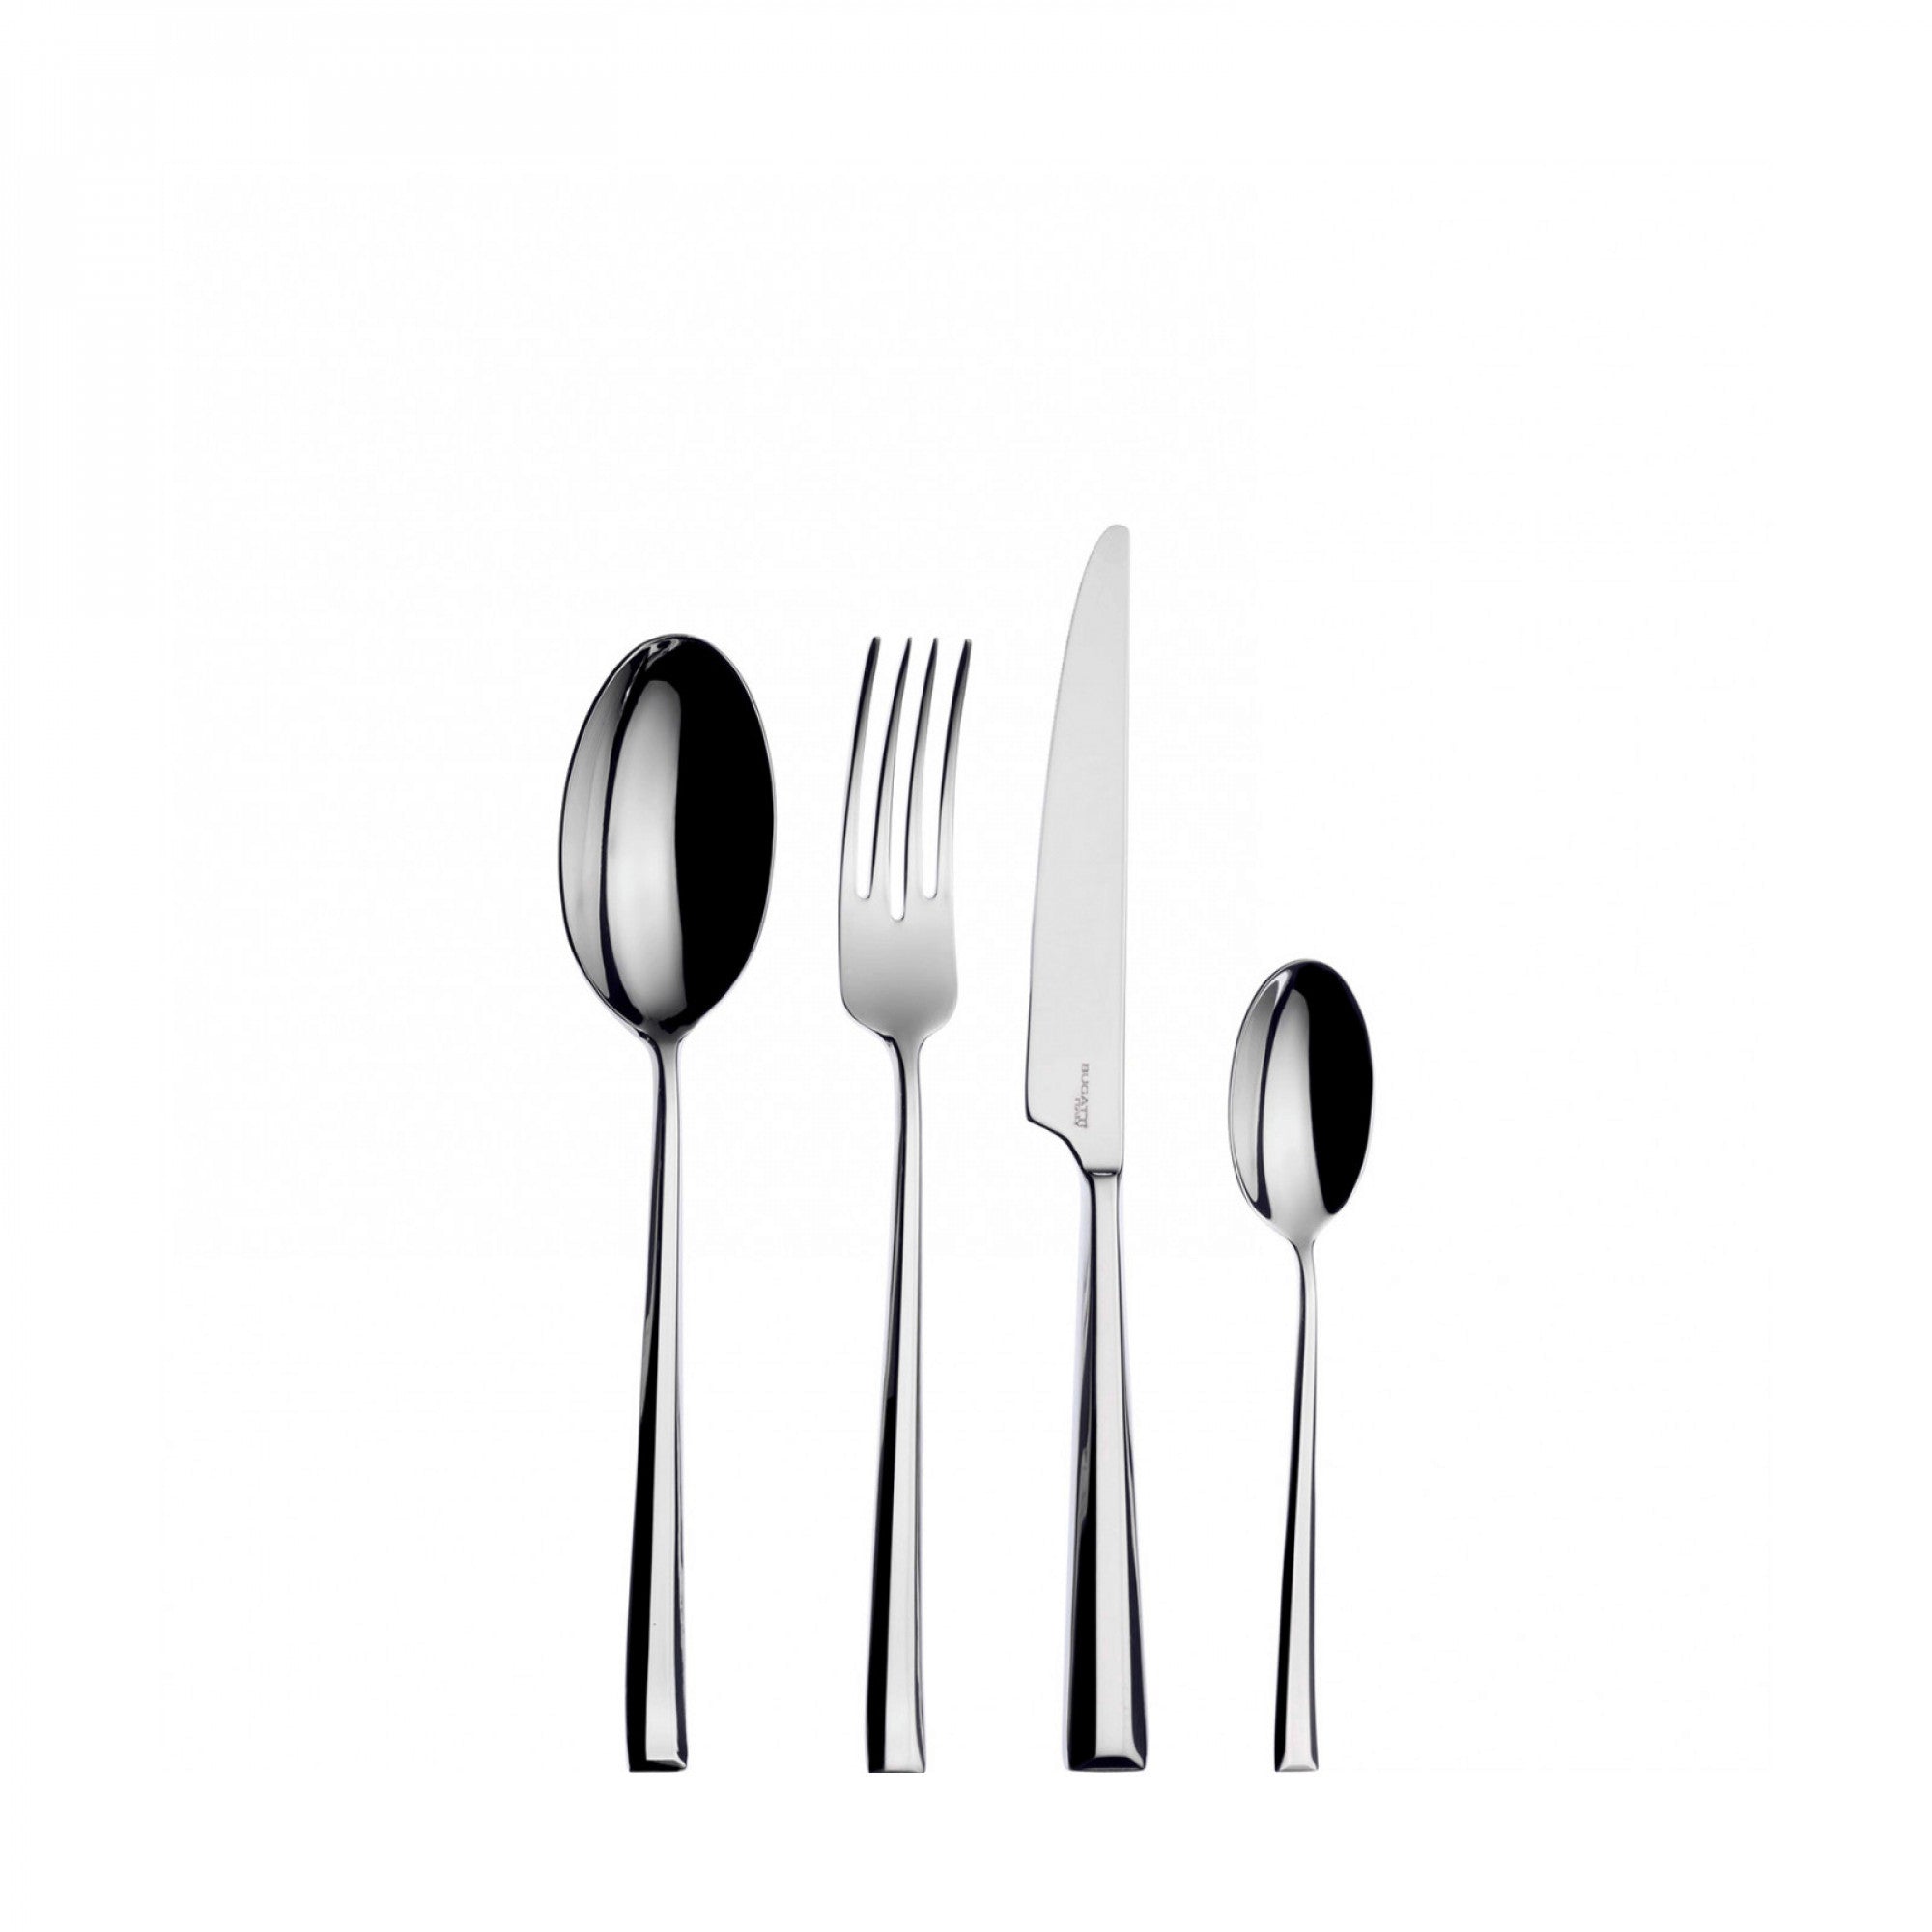 BUGATTI, Duetto, 24-piece cutlery set in 18/10 stainless steel